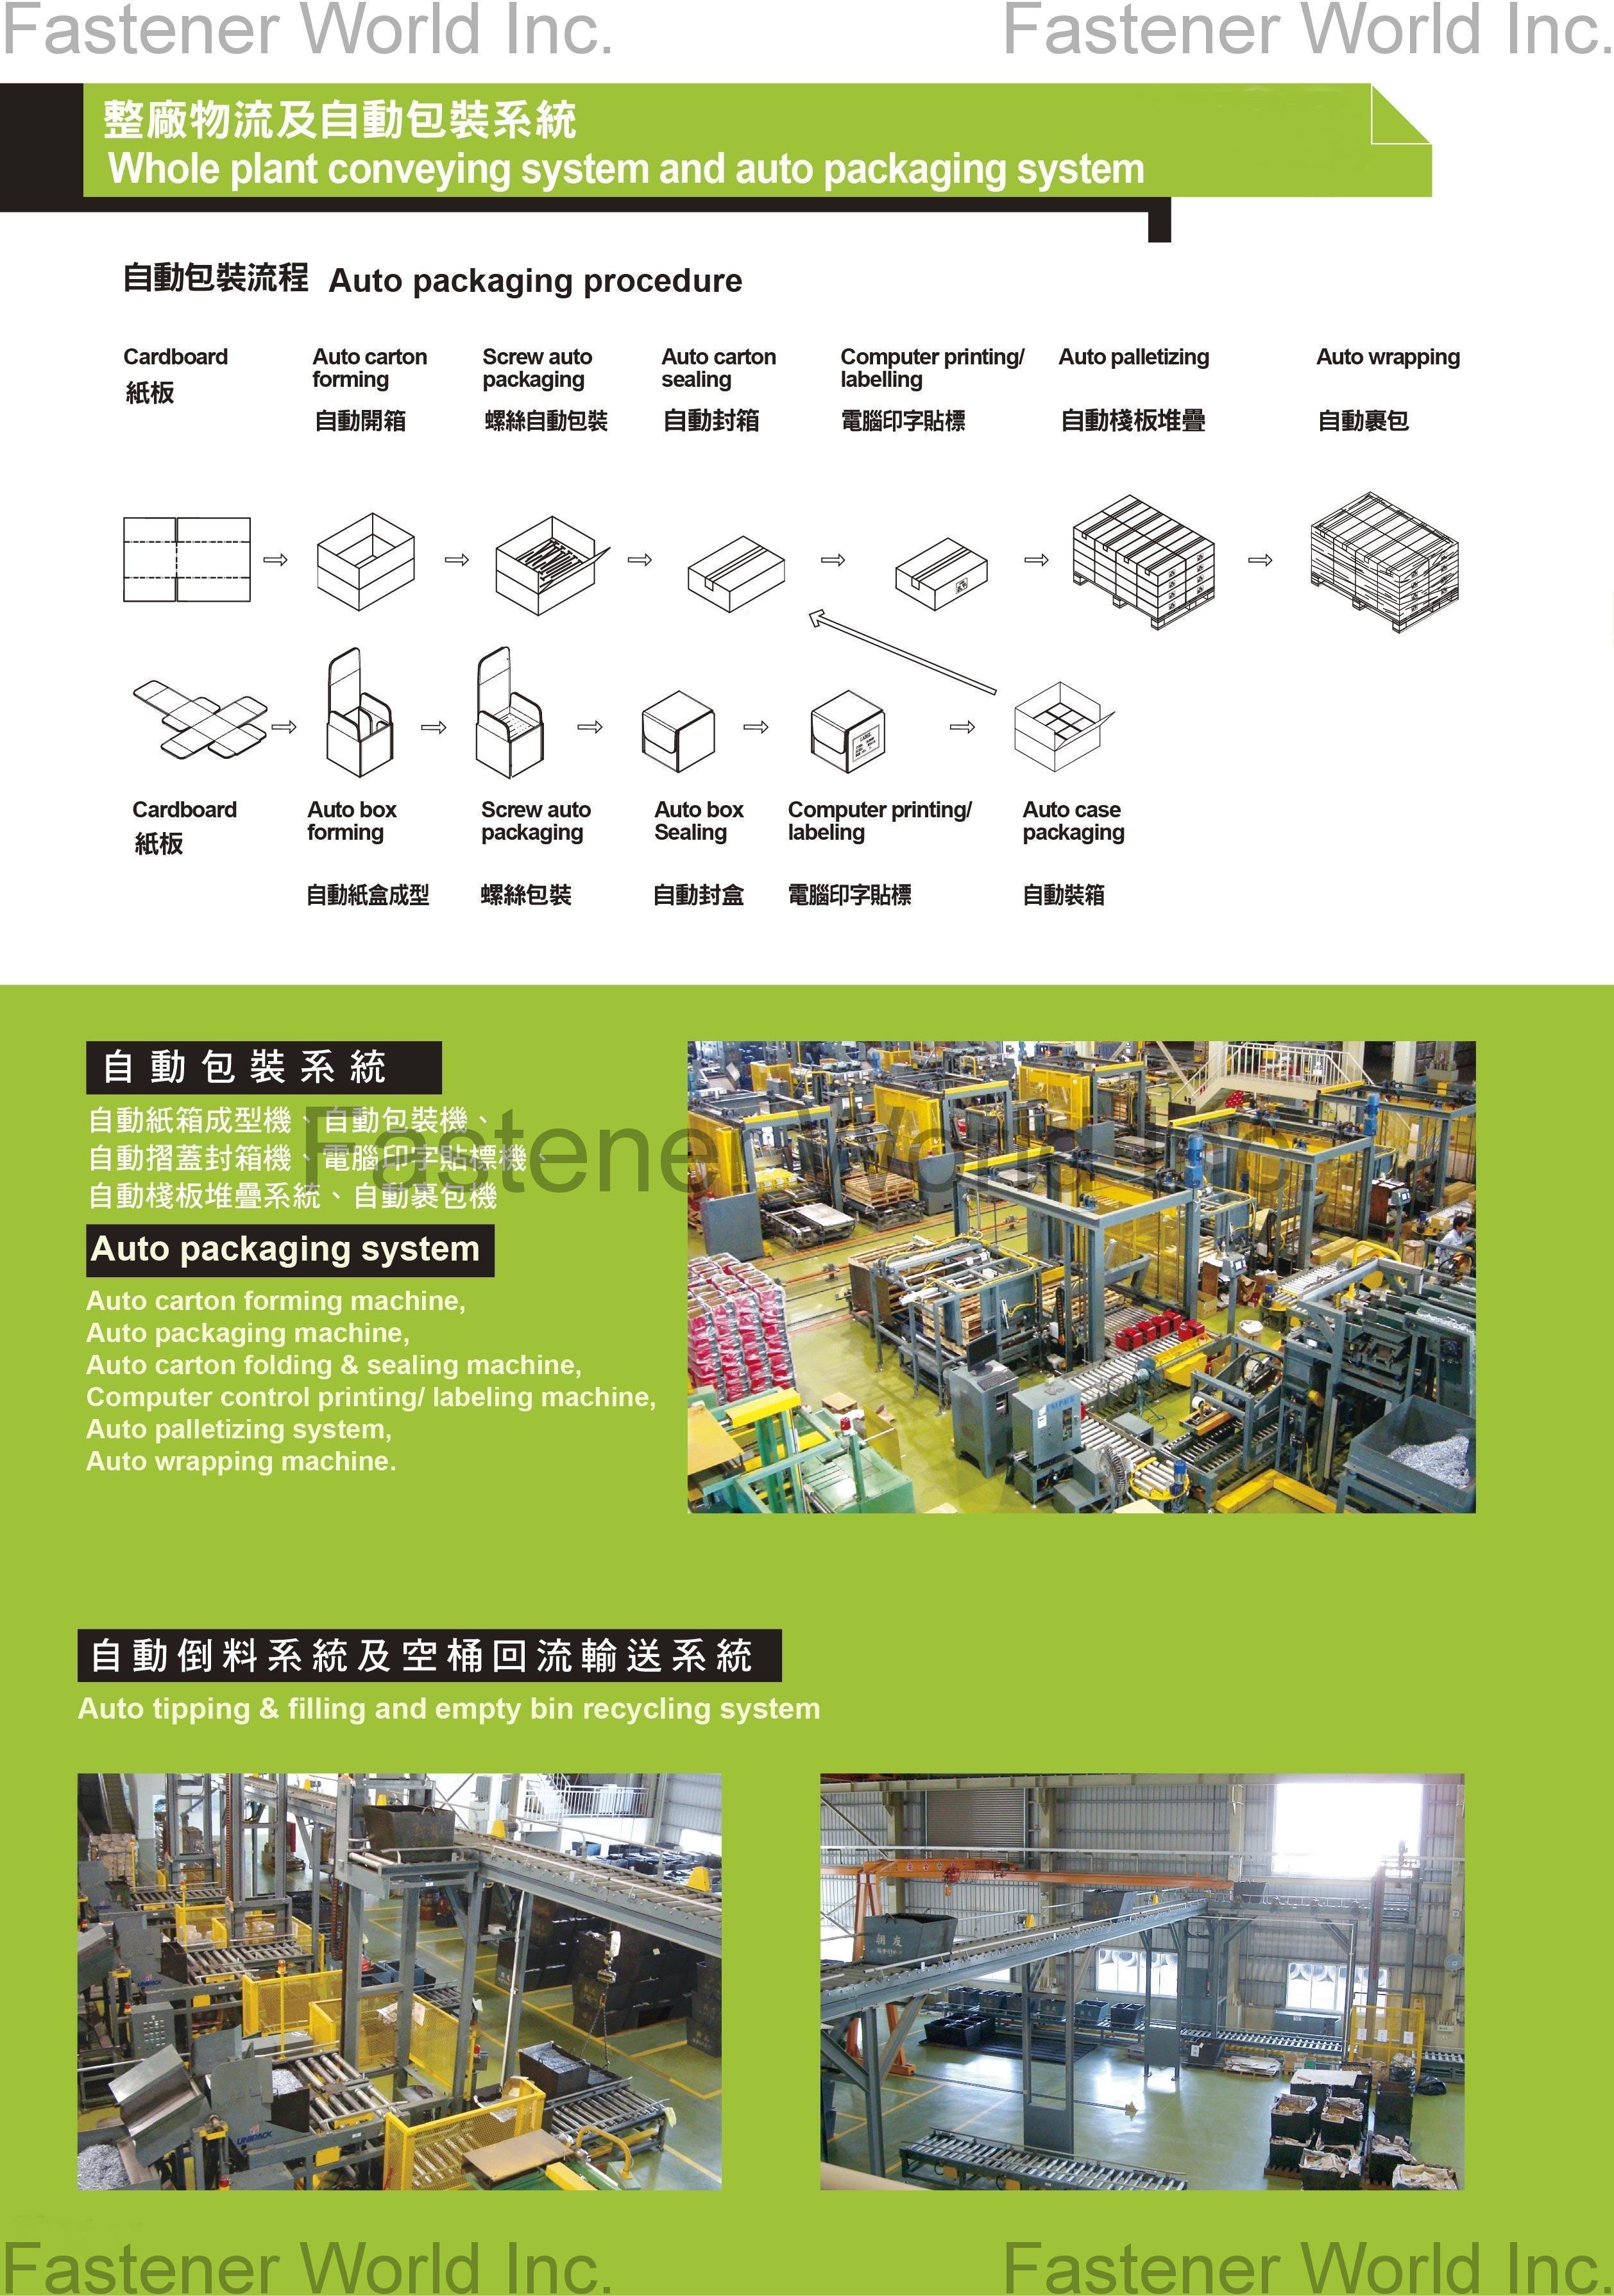 Automatic Conveying System Auto Carton Forming Machine, Auto Packaging Machine, Auto Carton Folding & Sealing Machine, Computer Control Printing / Labeling Machine, Auto Palletizing System, Auto Wrapping Machine, Auto Tipping & Filling and Empty Bin Recycling System